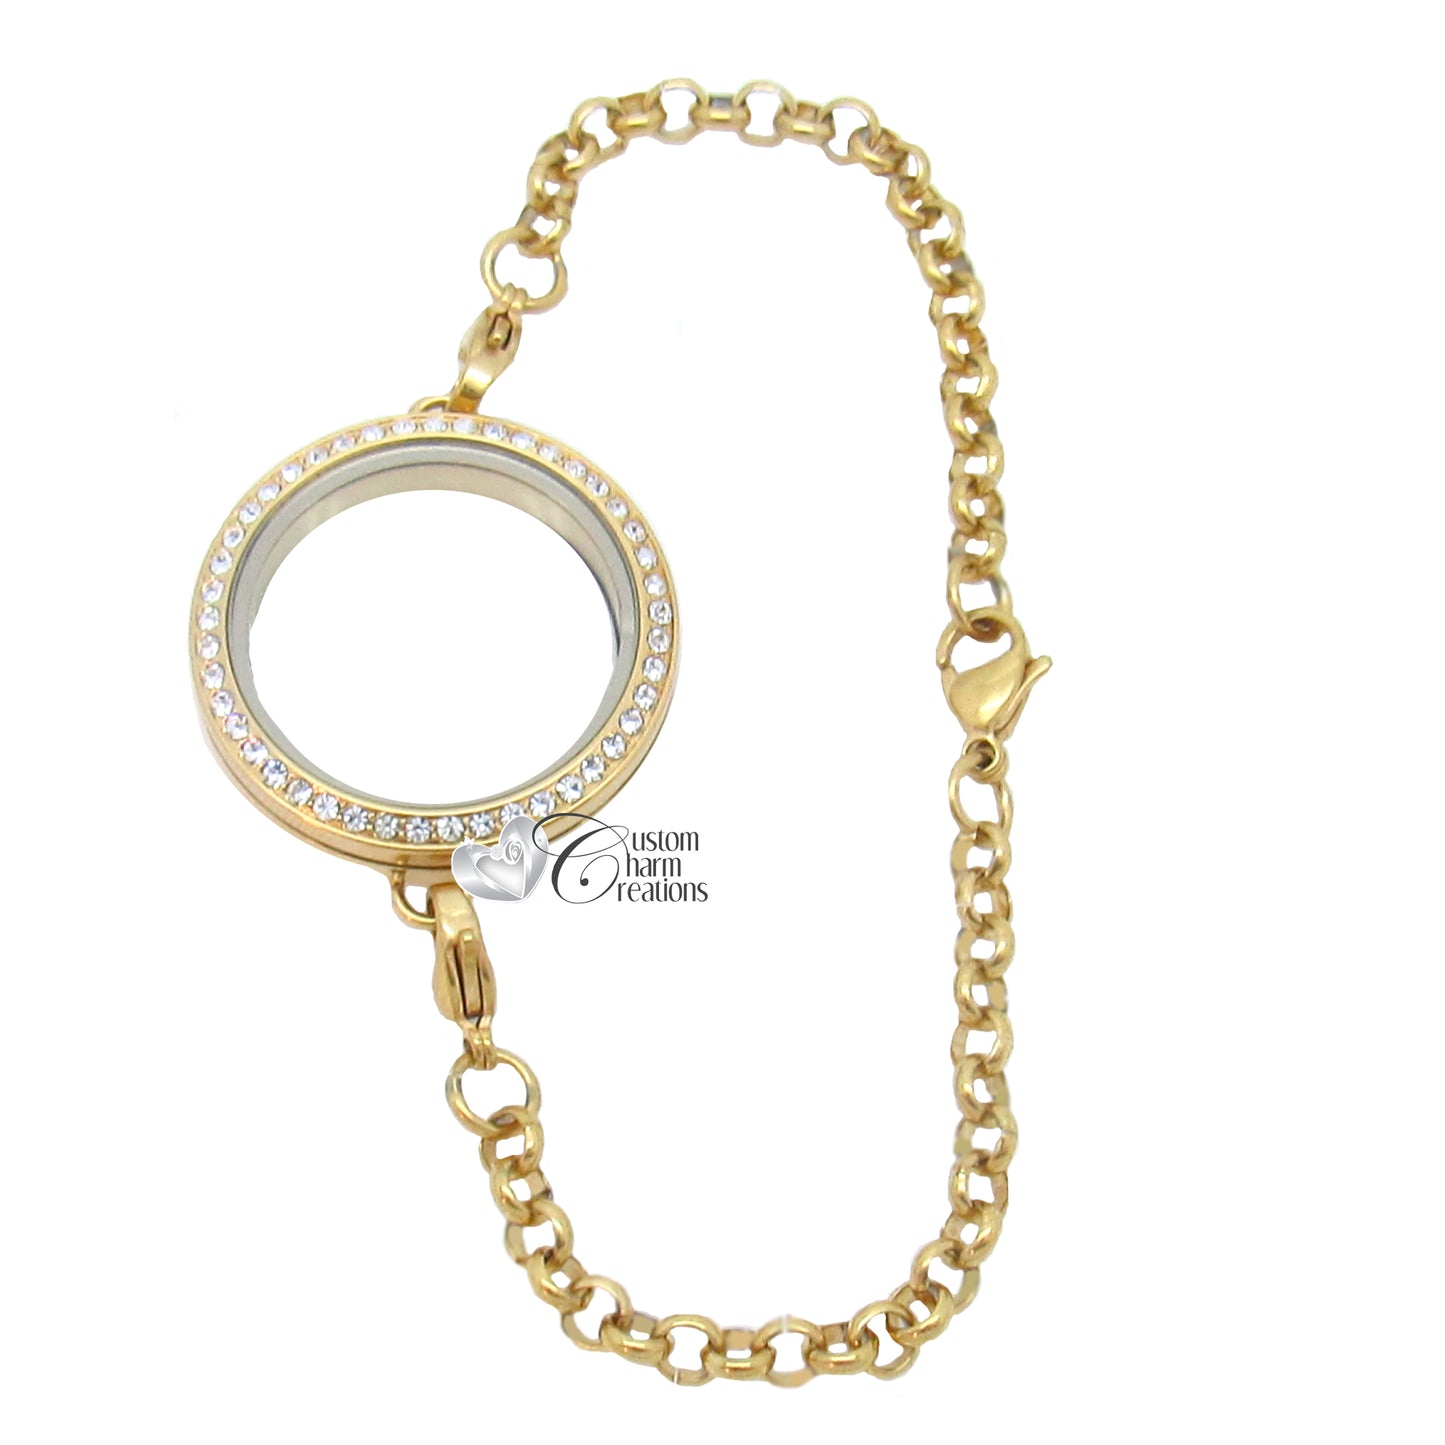 Gold Tone Stainless Steel Floating Locket Bracelet with Crystals